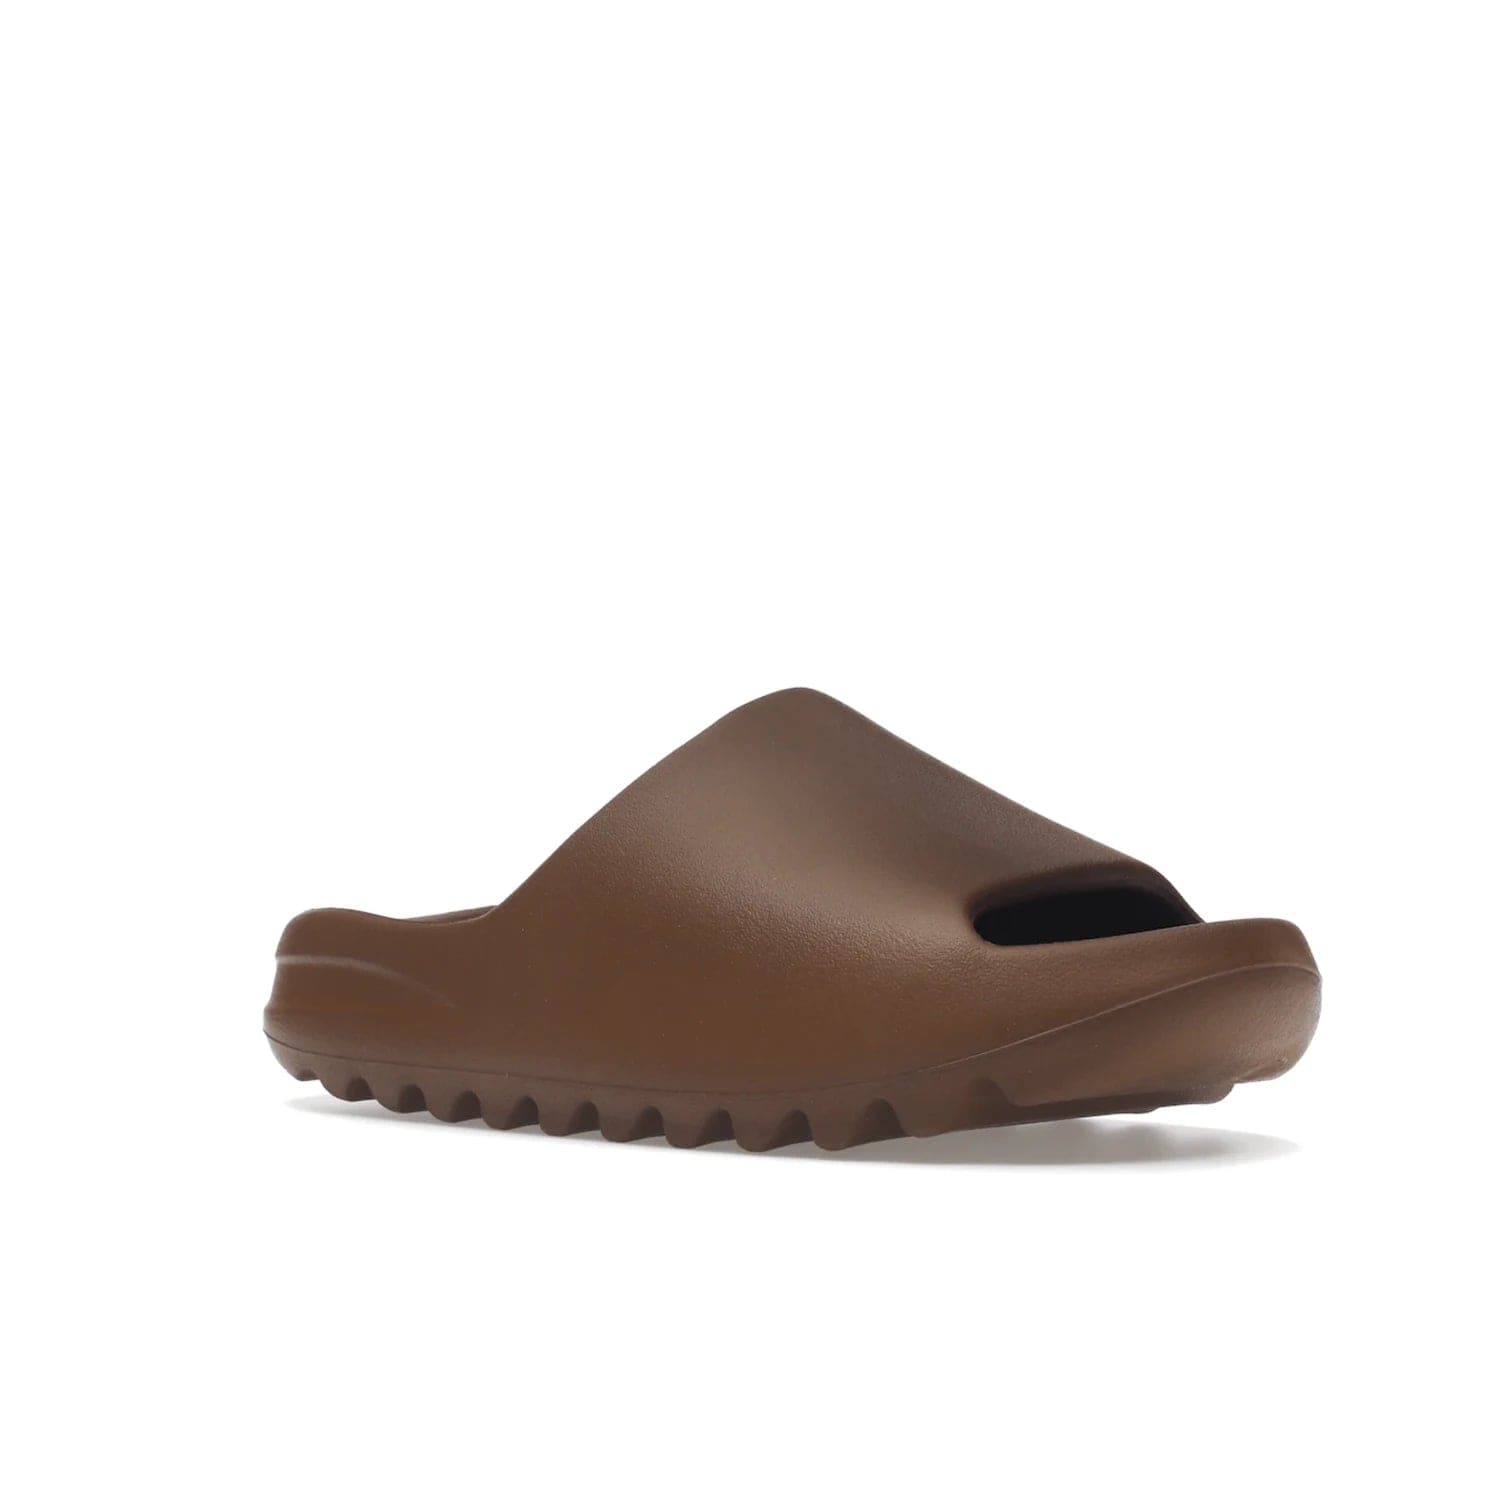 adidas Yeezy Slide Flax - Image 5 - Only at www.BallersClubKickz.com - Score the perfect casual look with the adidas Yeezy Slide Flax. Made with lightweight injected EVA plus horizontal grooves underfoot for traction. Release on August 22, 2022. $70.